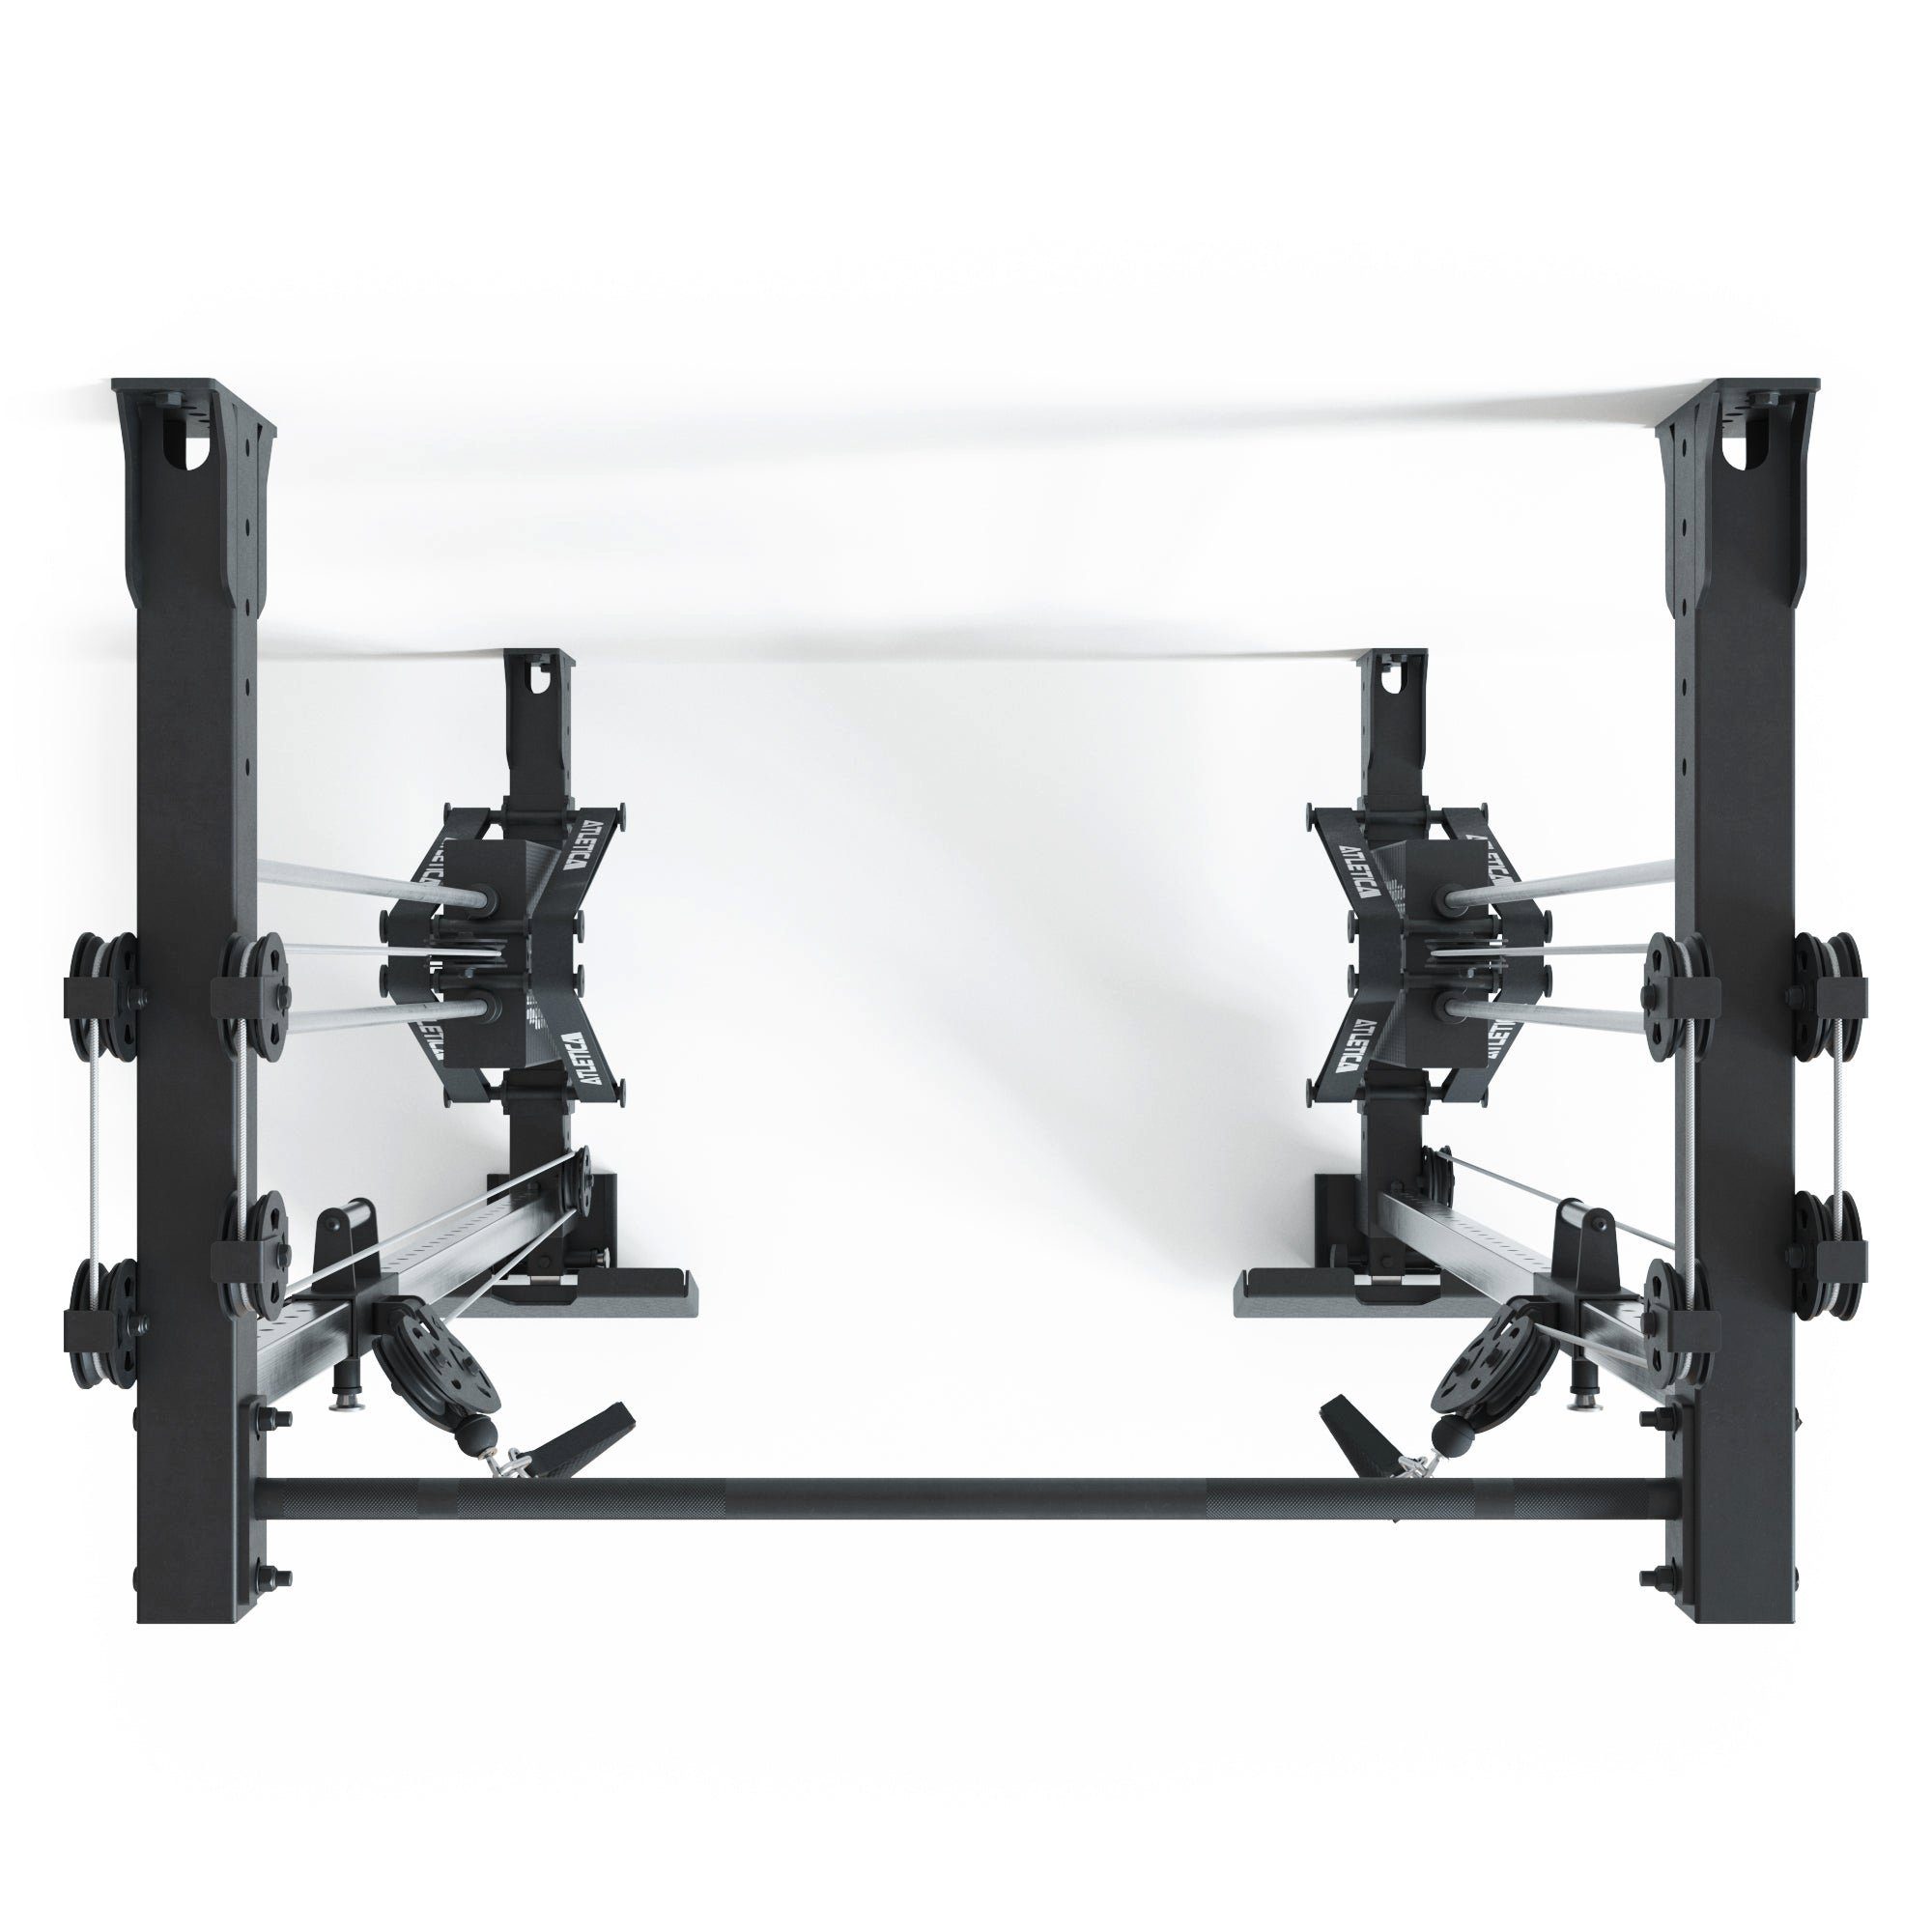 Double ATLETICA Power Wall Stack Cable Mounted Cross, Rack Mit kg R8-Nitro 2x90